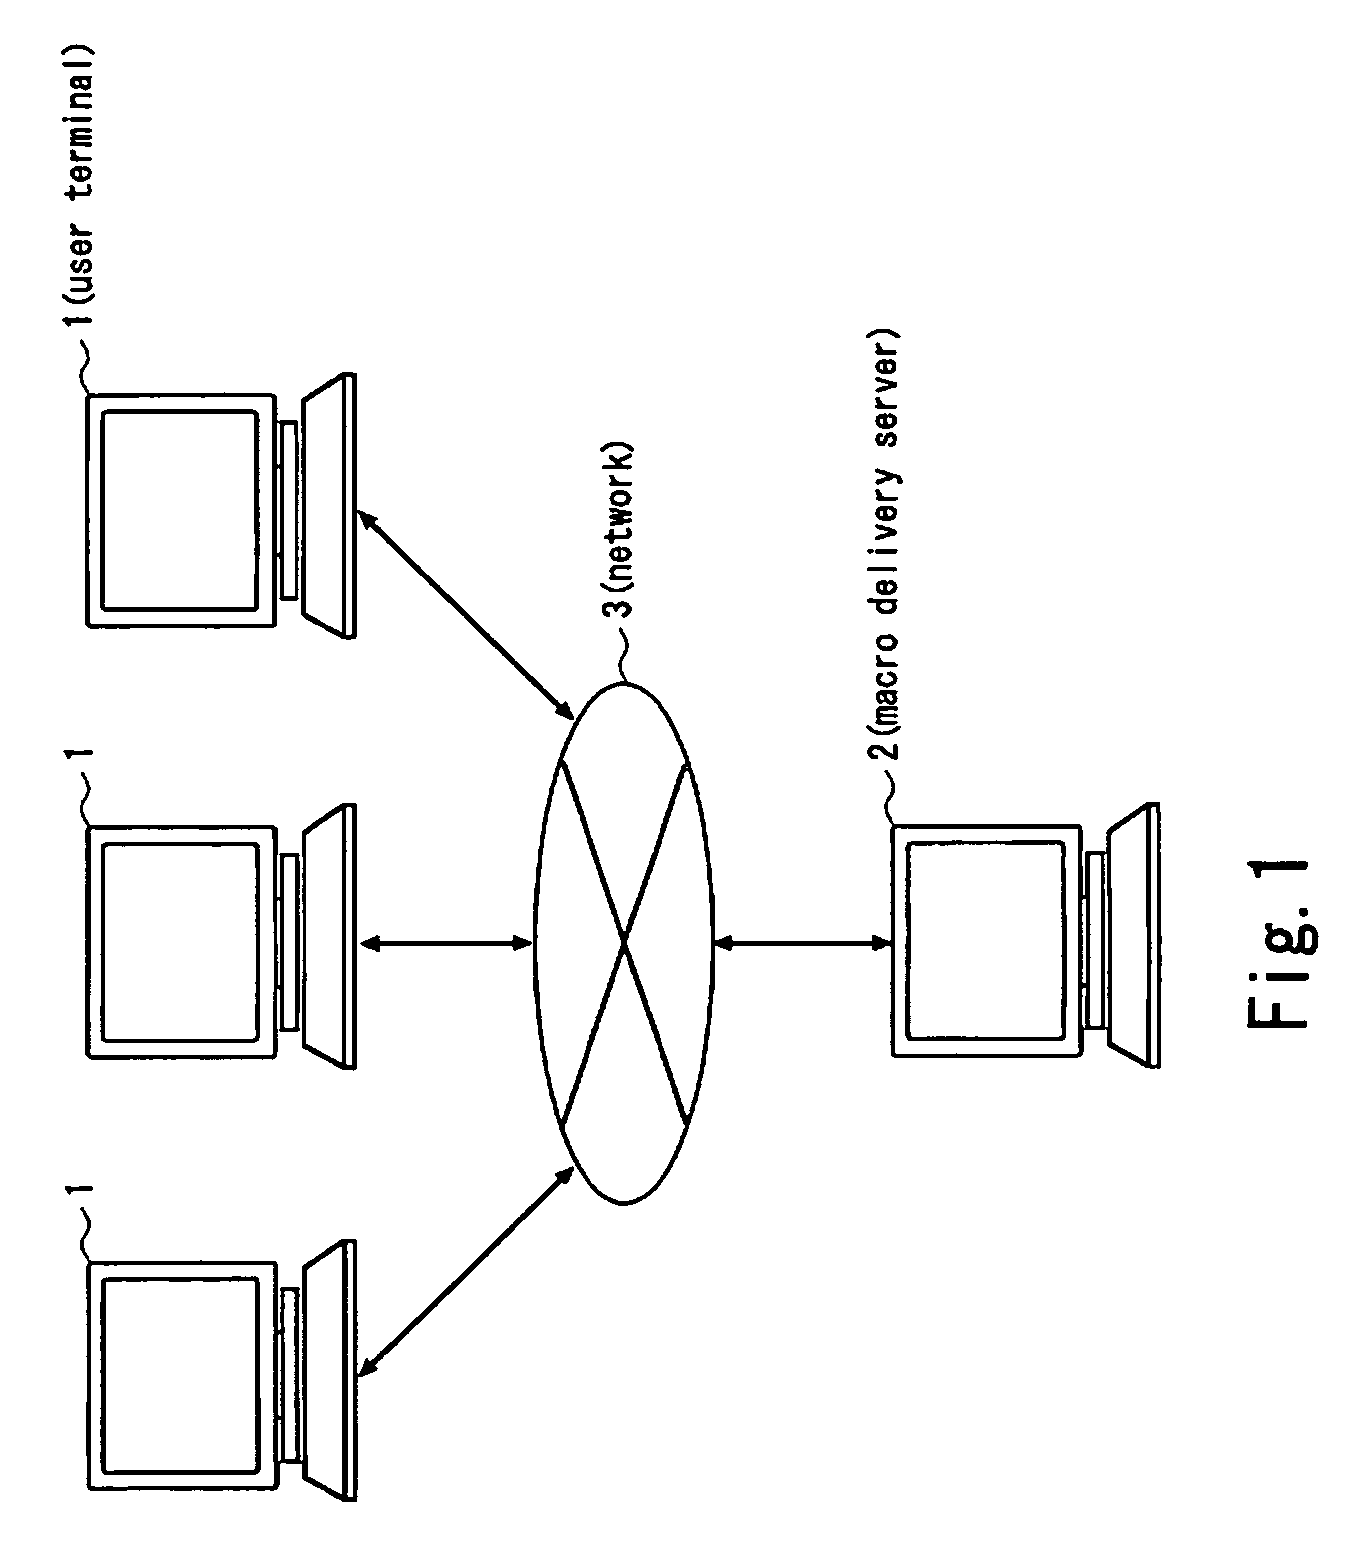 Macro delivery system and macro delivery program